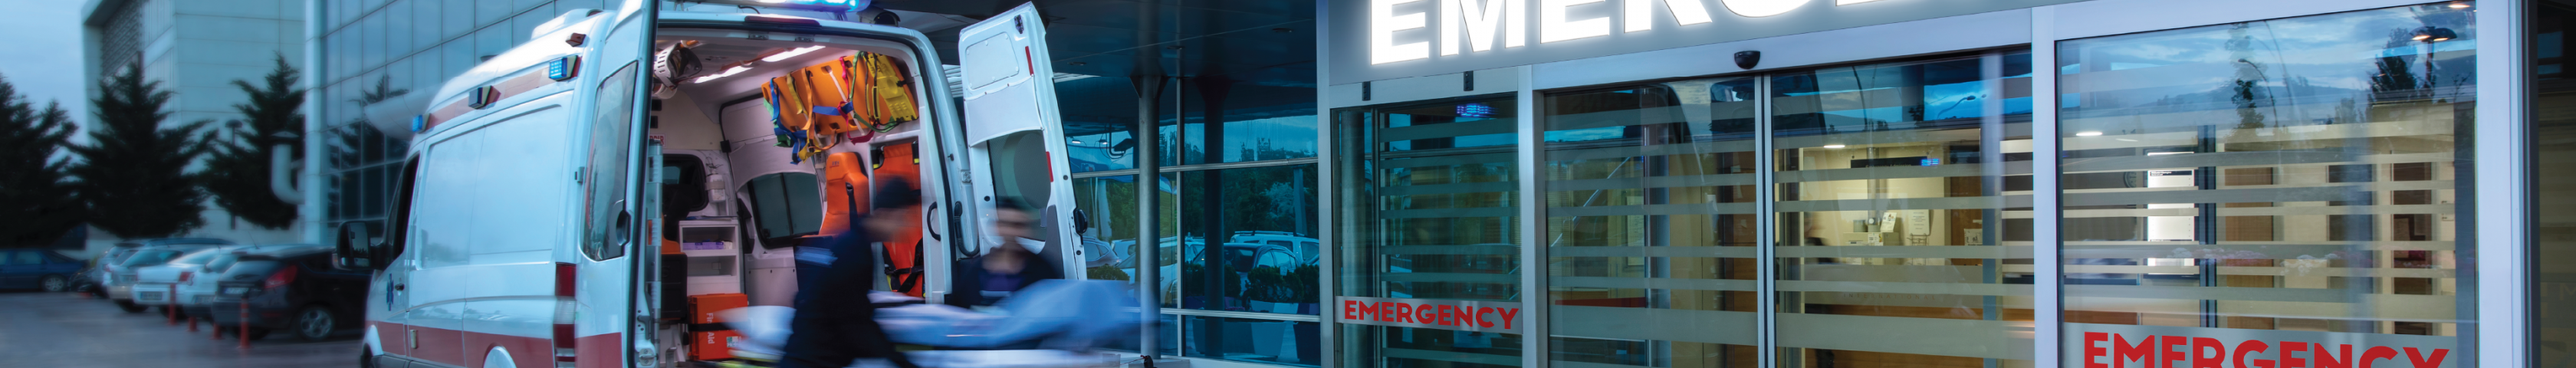 Ambulance in front of an emergency room entrance